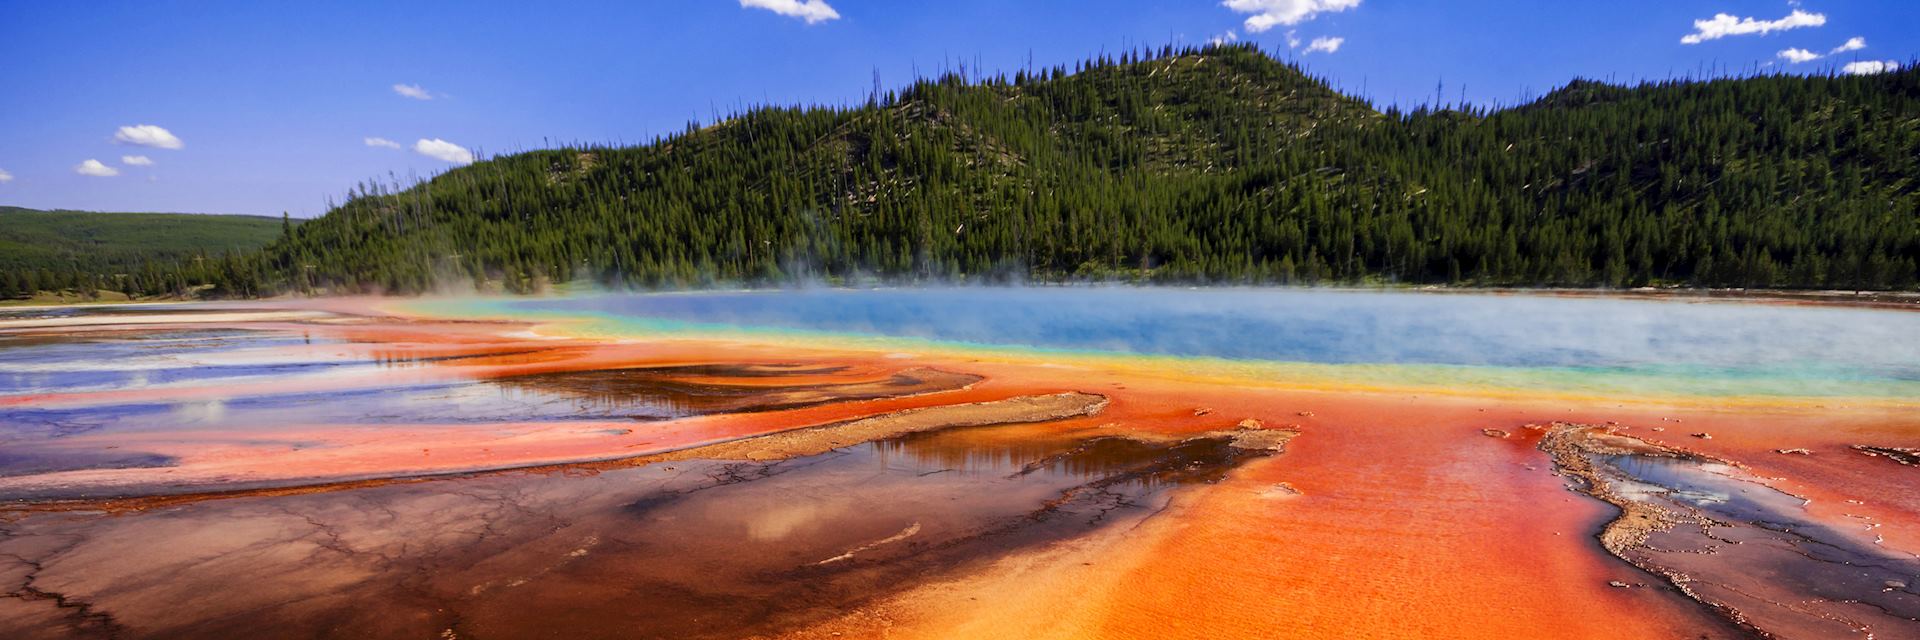 Hot spring, Yellowstone National Park